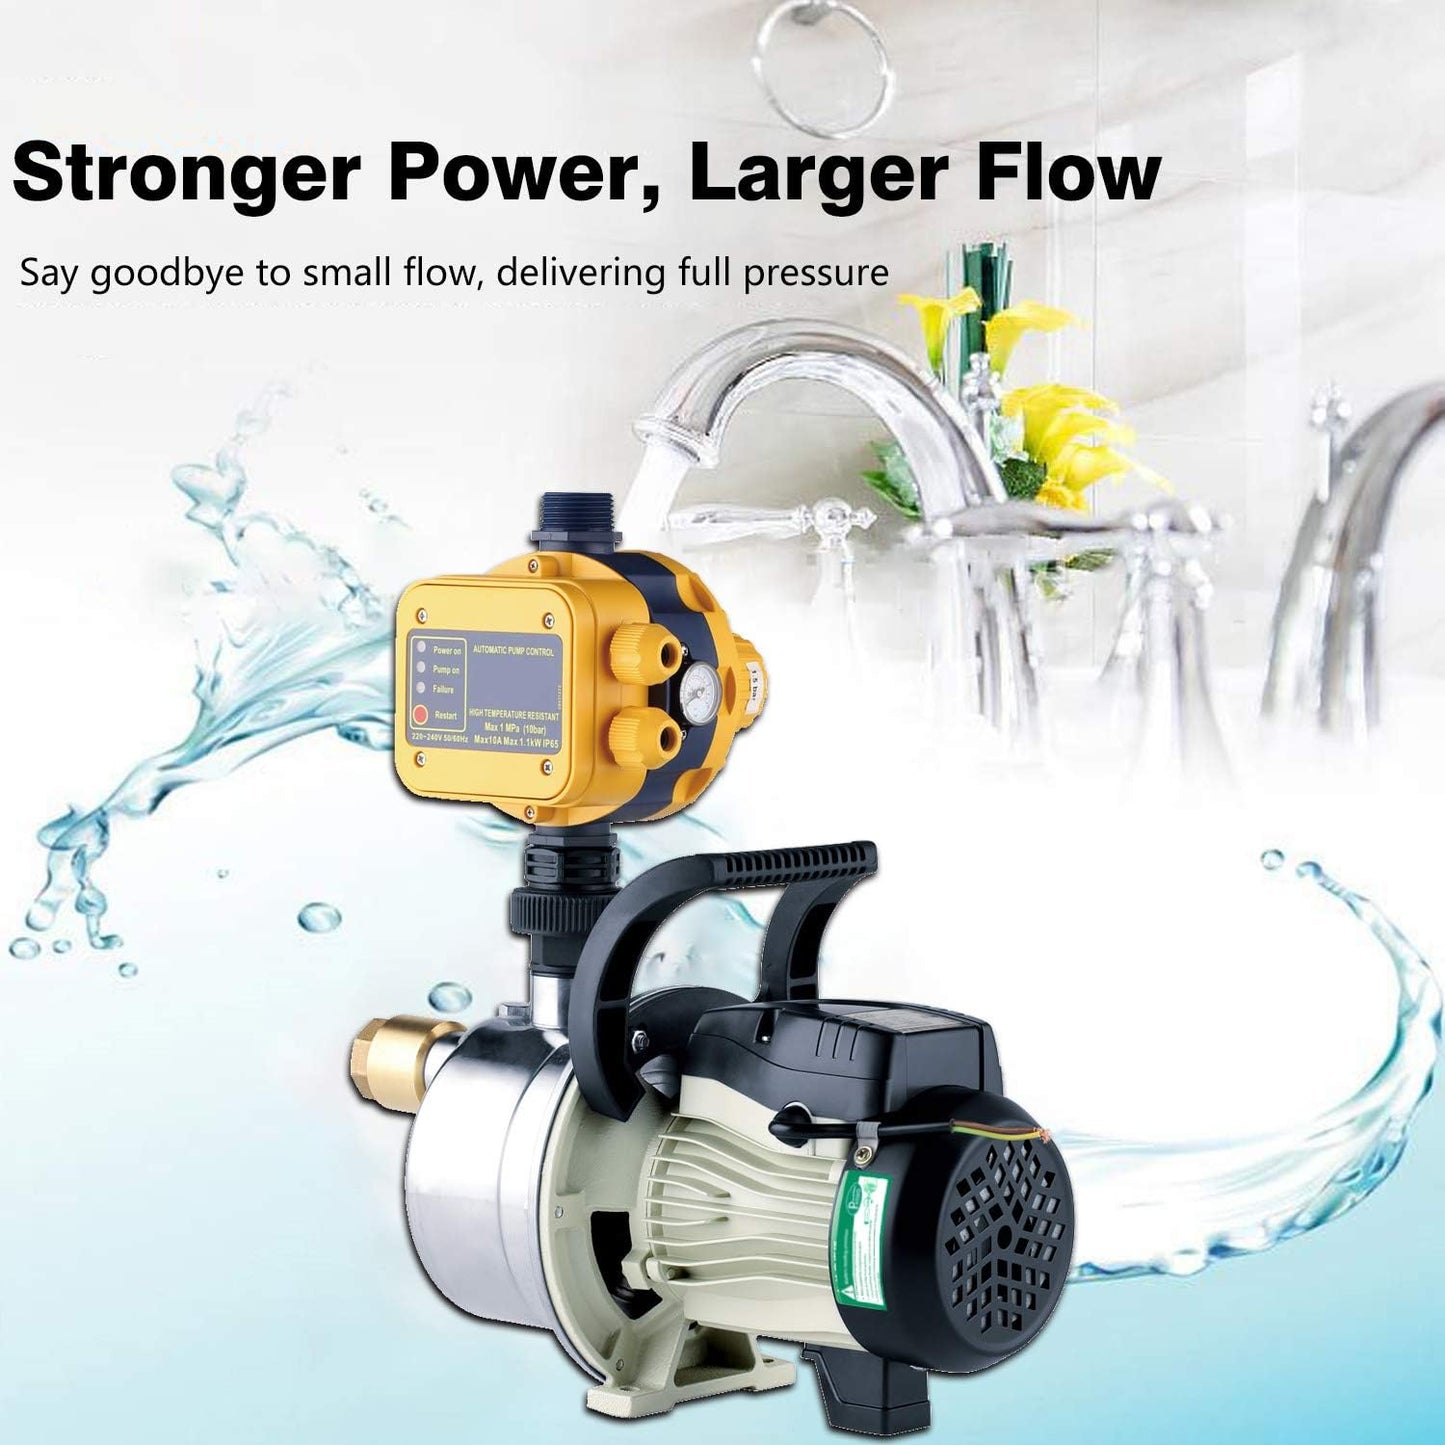 TDRFORCE 3/4 HP Water Pressure Booster Pump 110V Inline Water Transfer Pump Automatic Self Priming Irrigation Pump Shallow Well Jet Pump Household Booster Pump